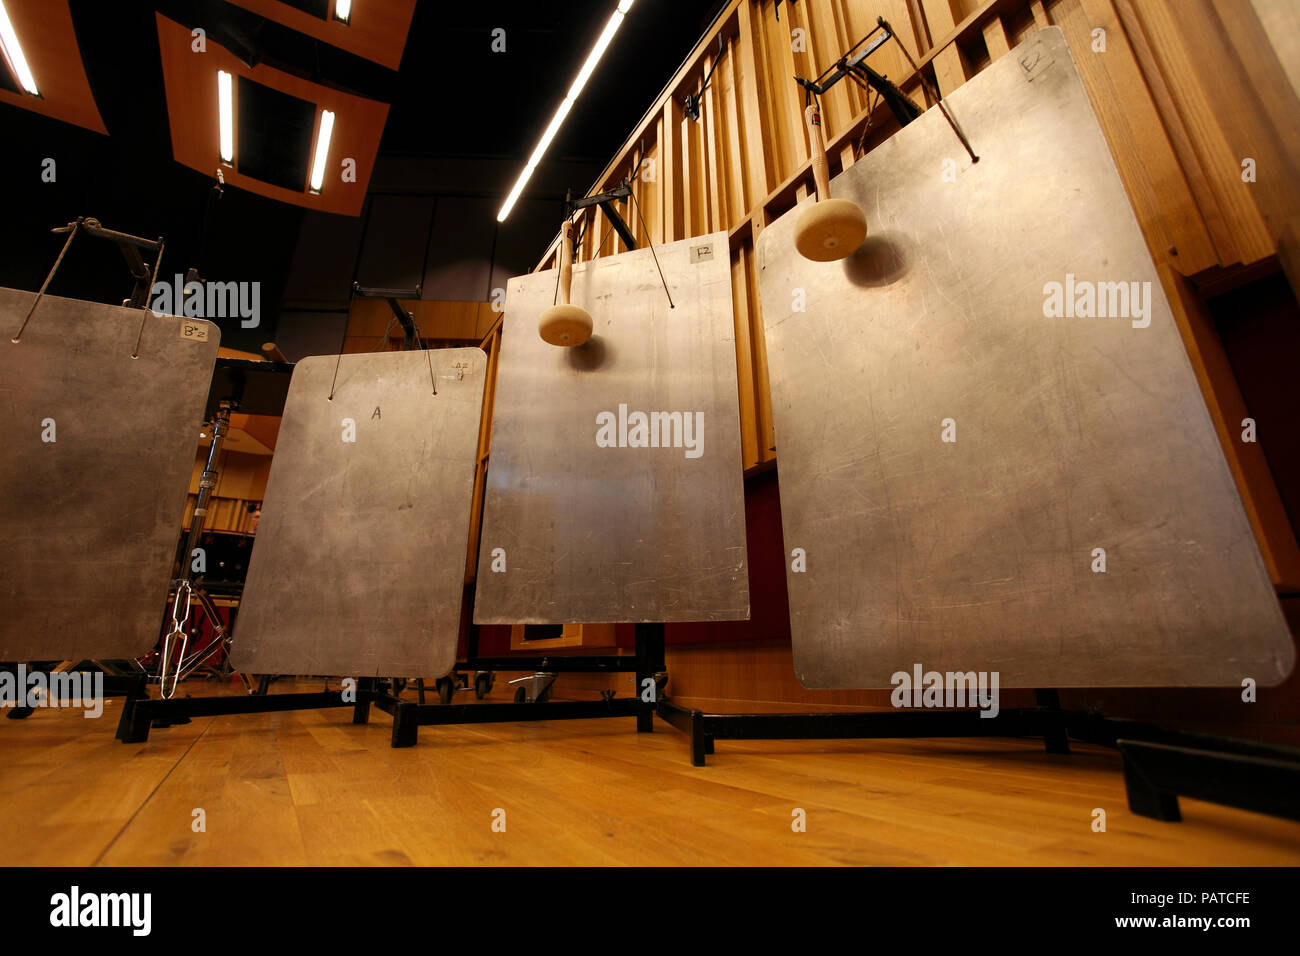 Bell plates hanging on stands. Aluminium pitched percussion instrument Stock Photo